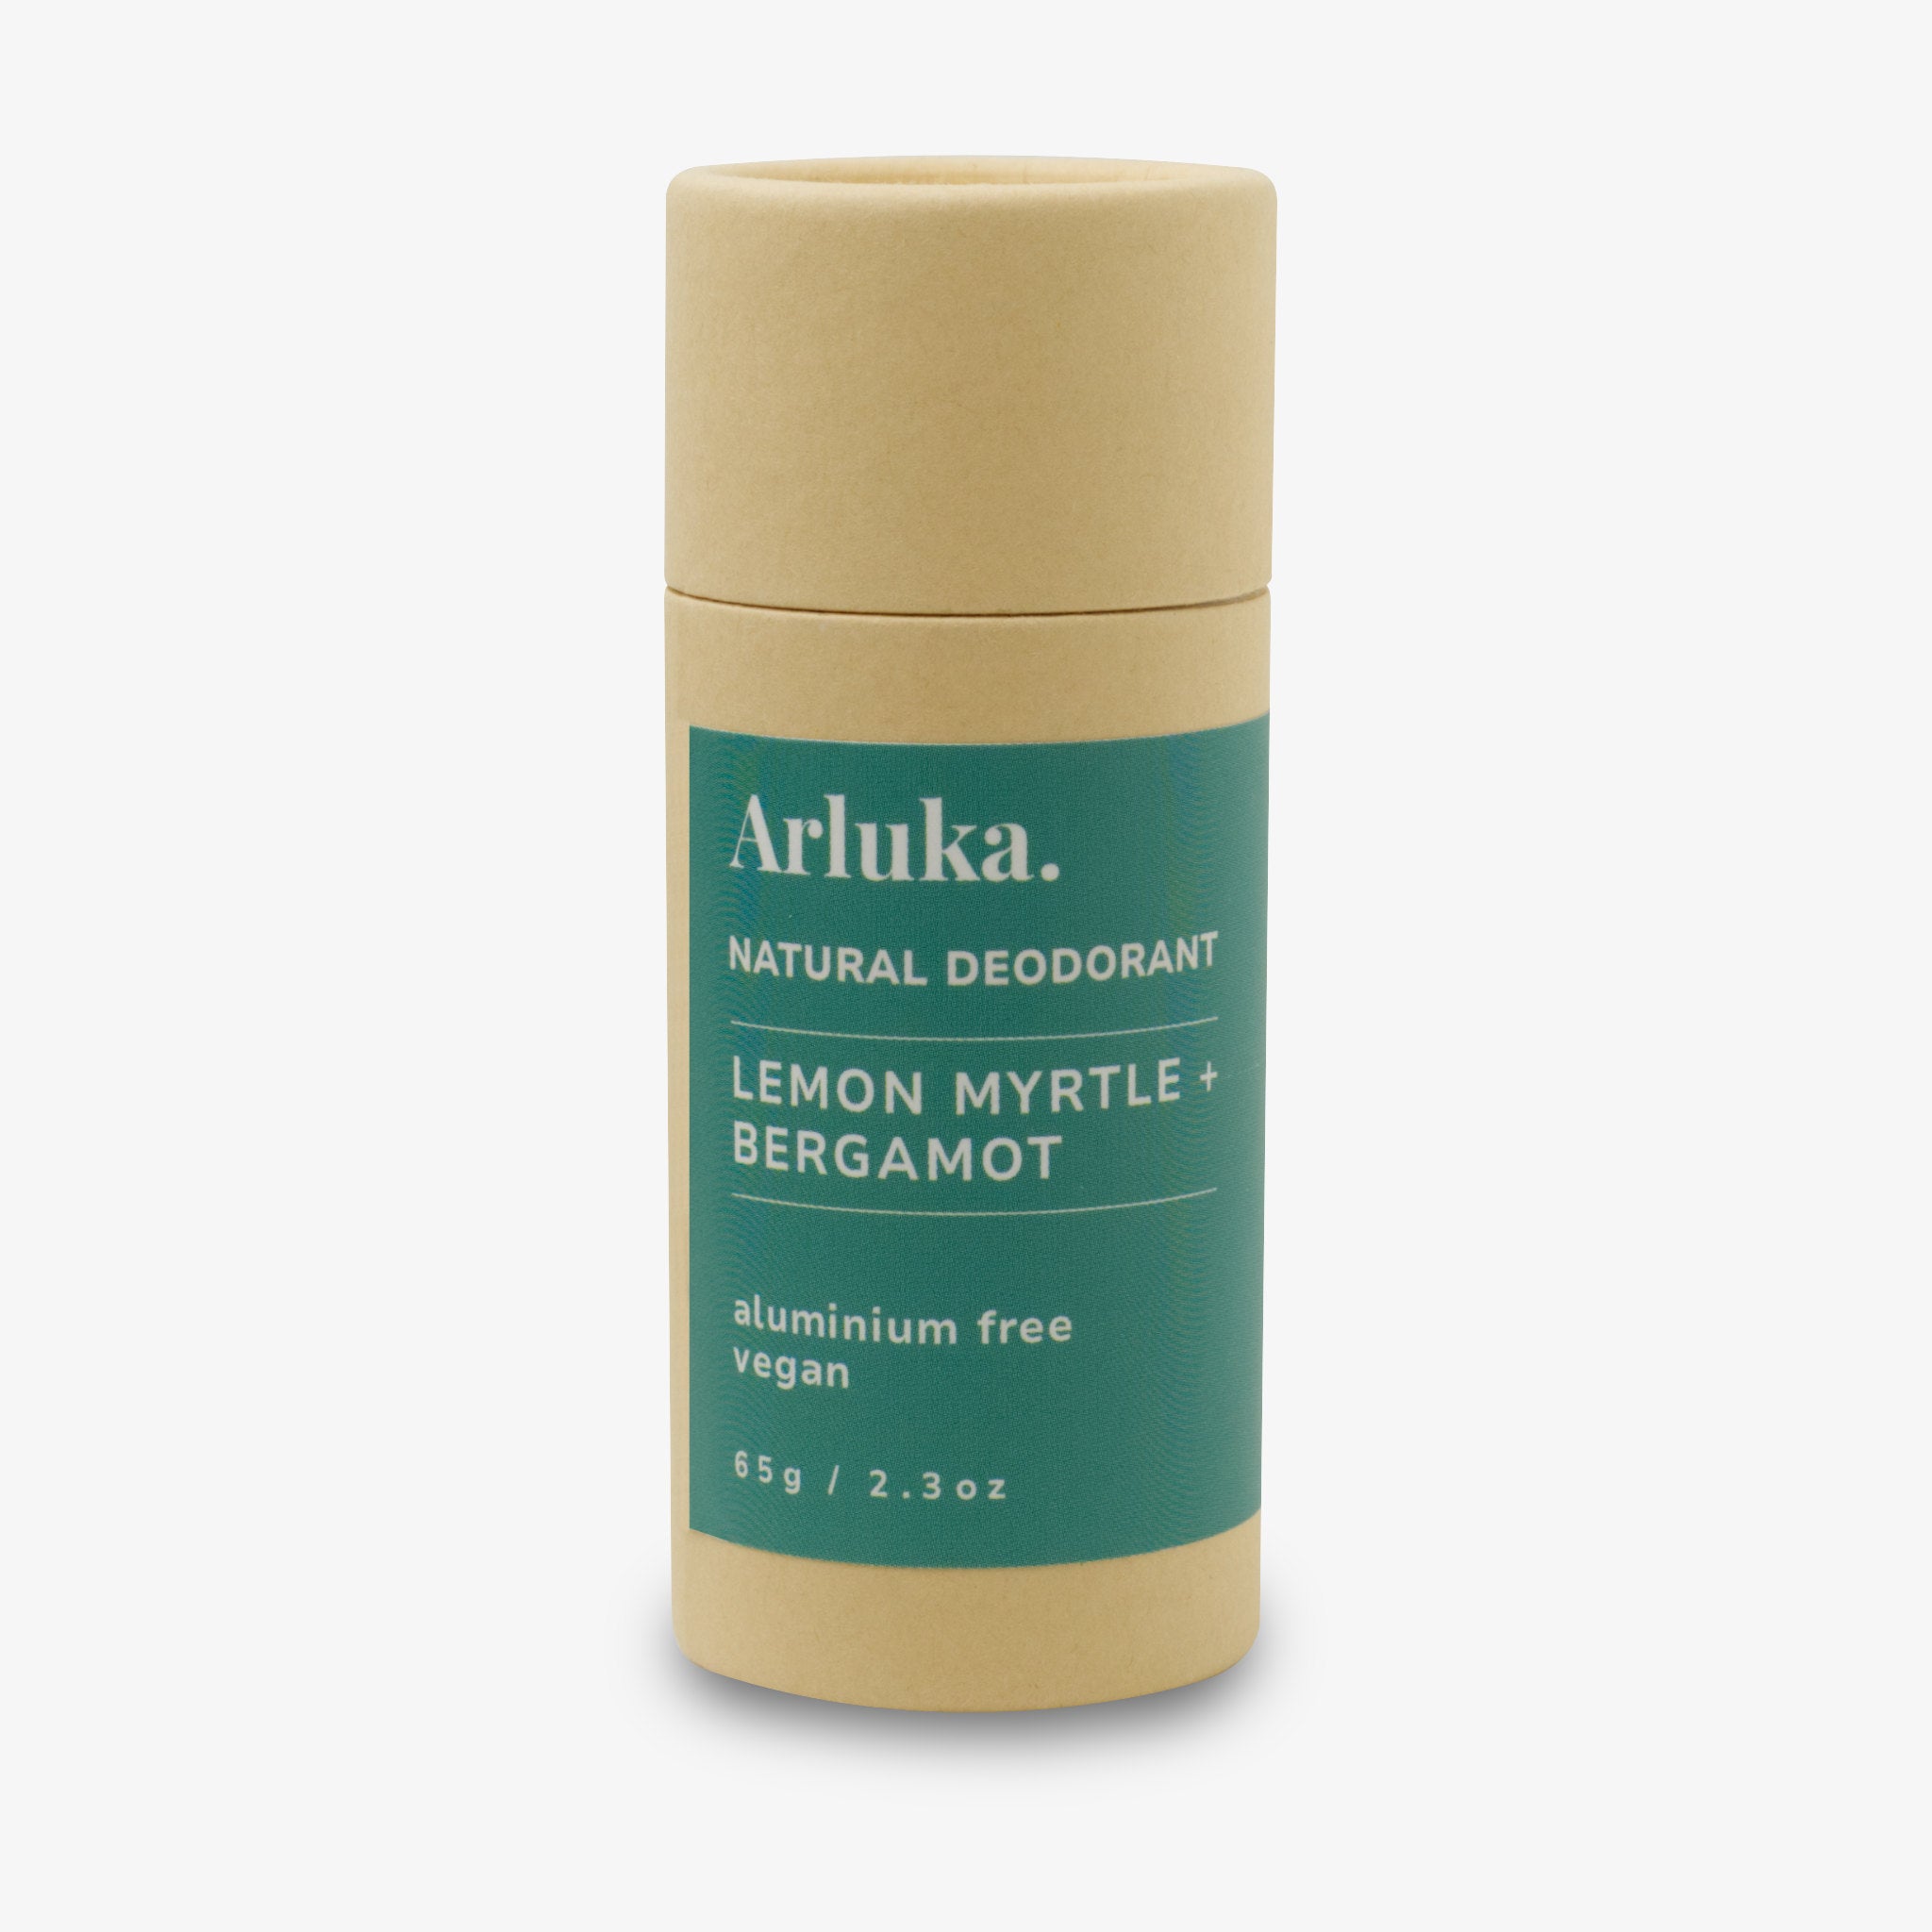 Natural deodorant from Wild helps you say bye-bye to B.O. *and* plastic